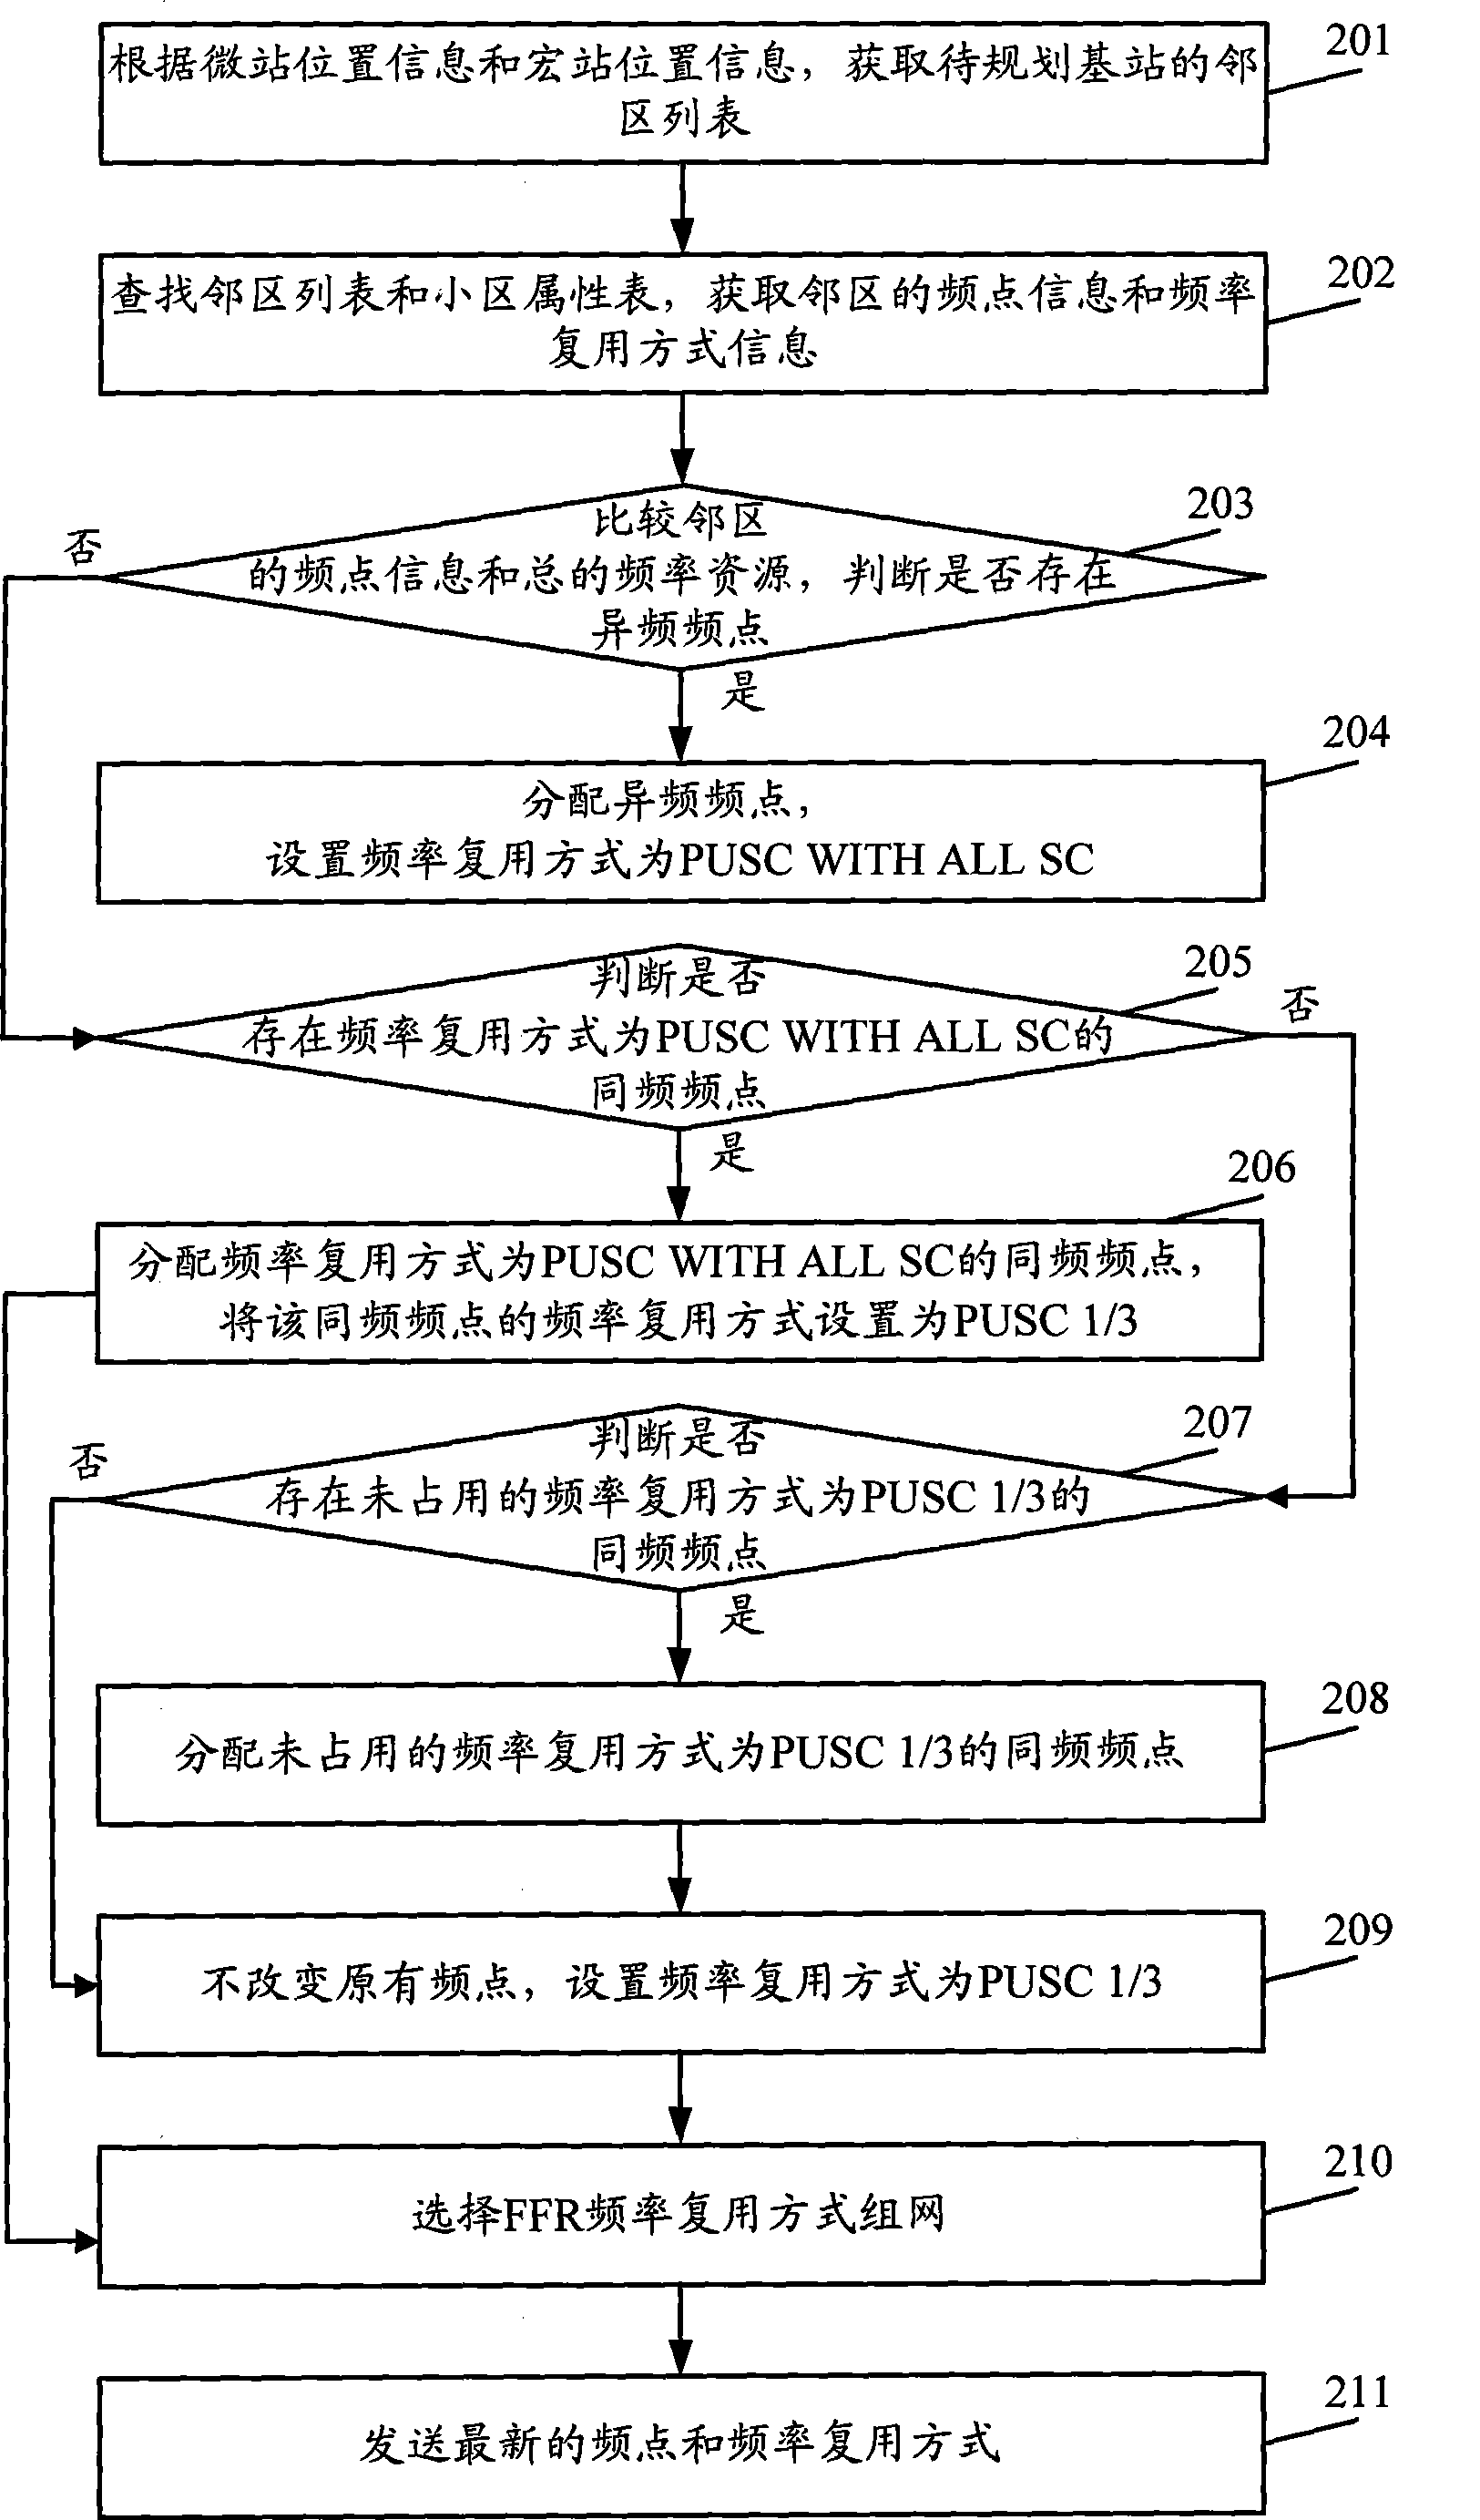 Method and apparatus for network planning